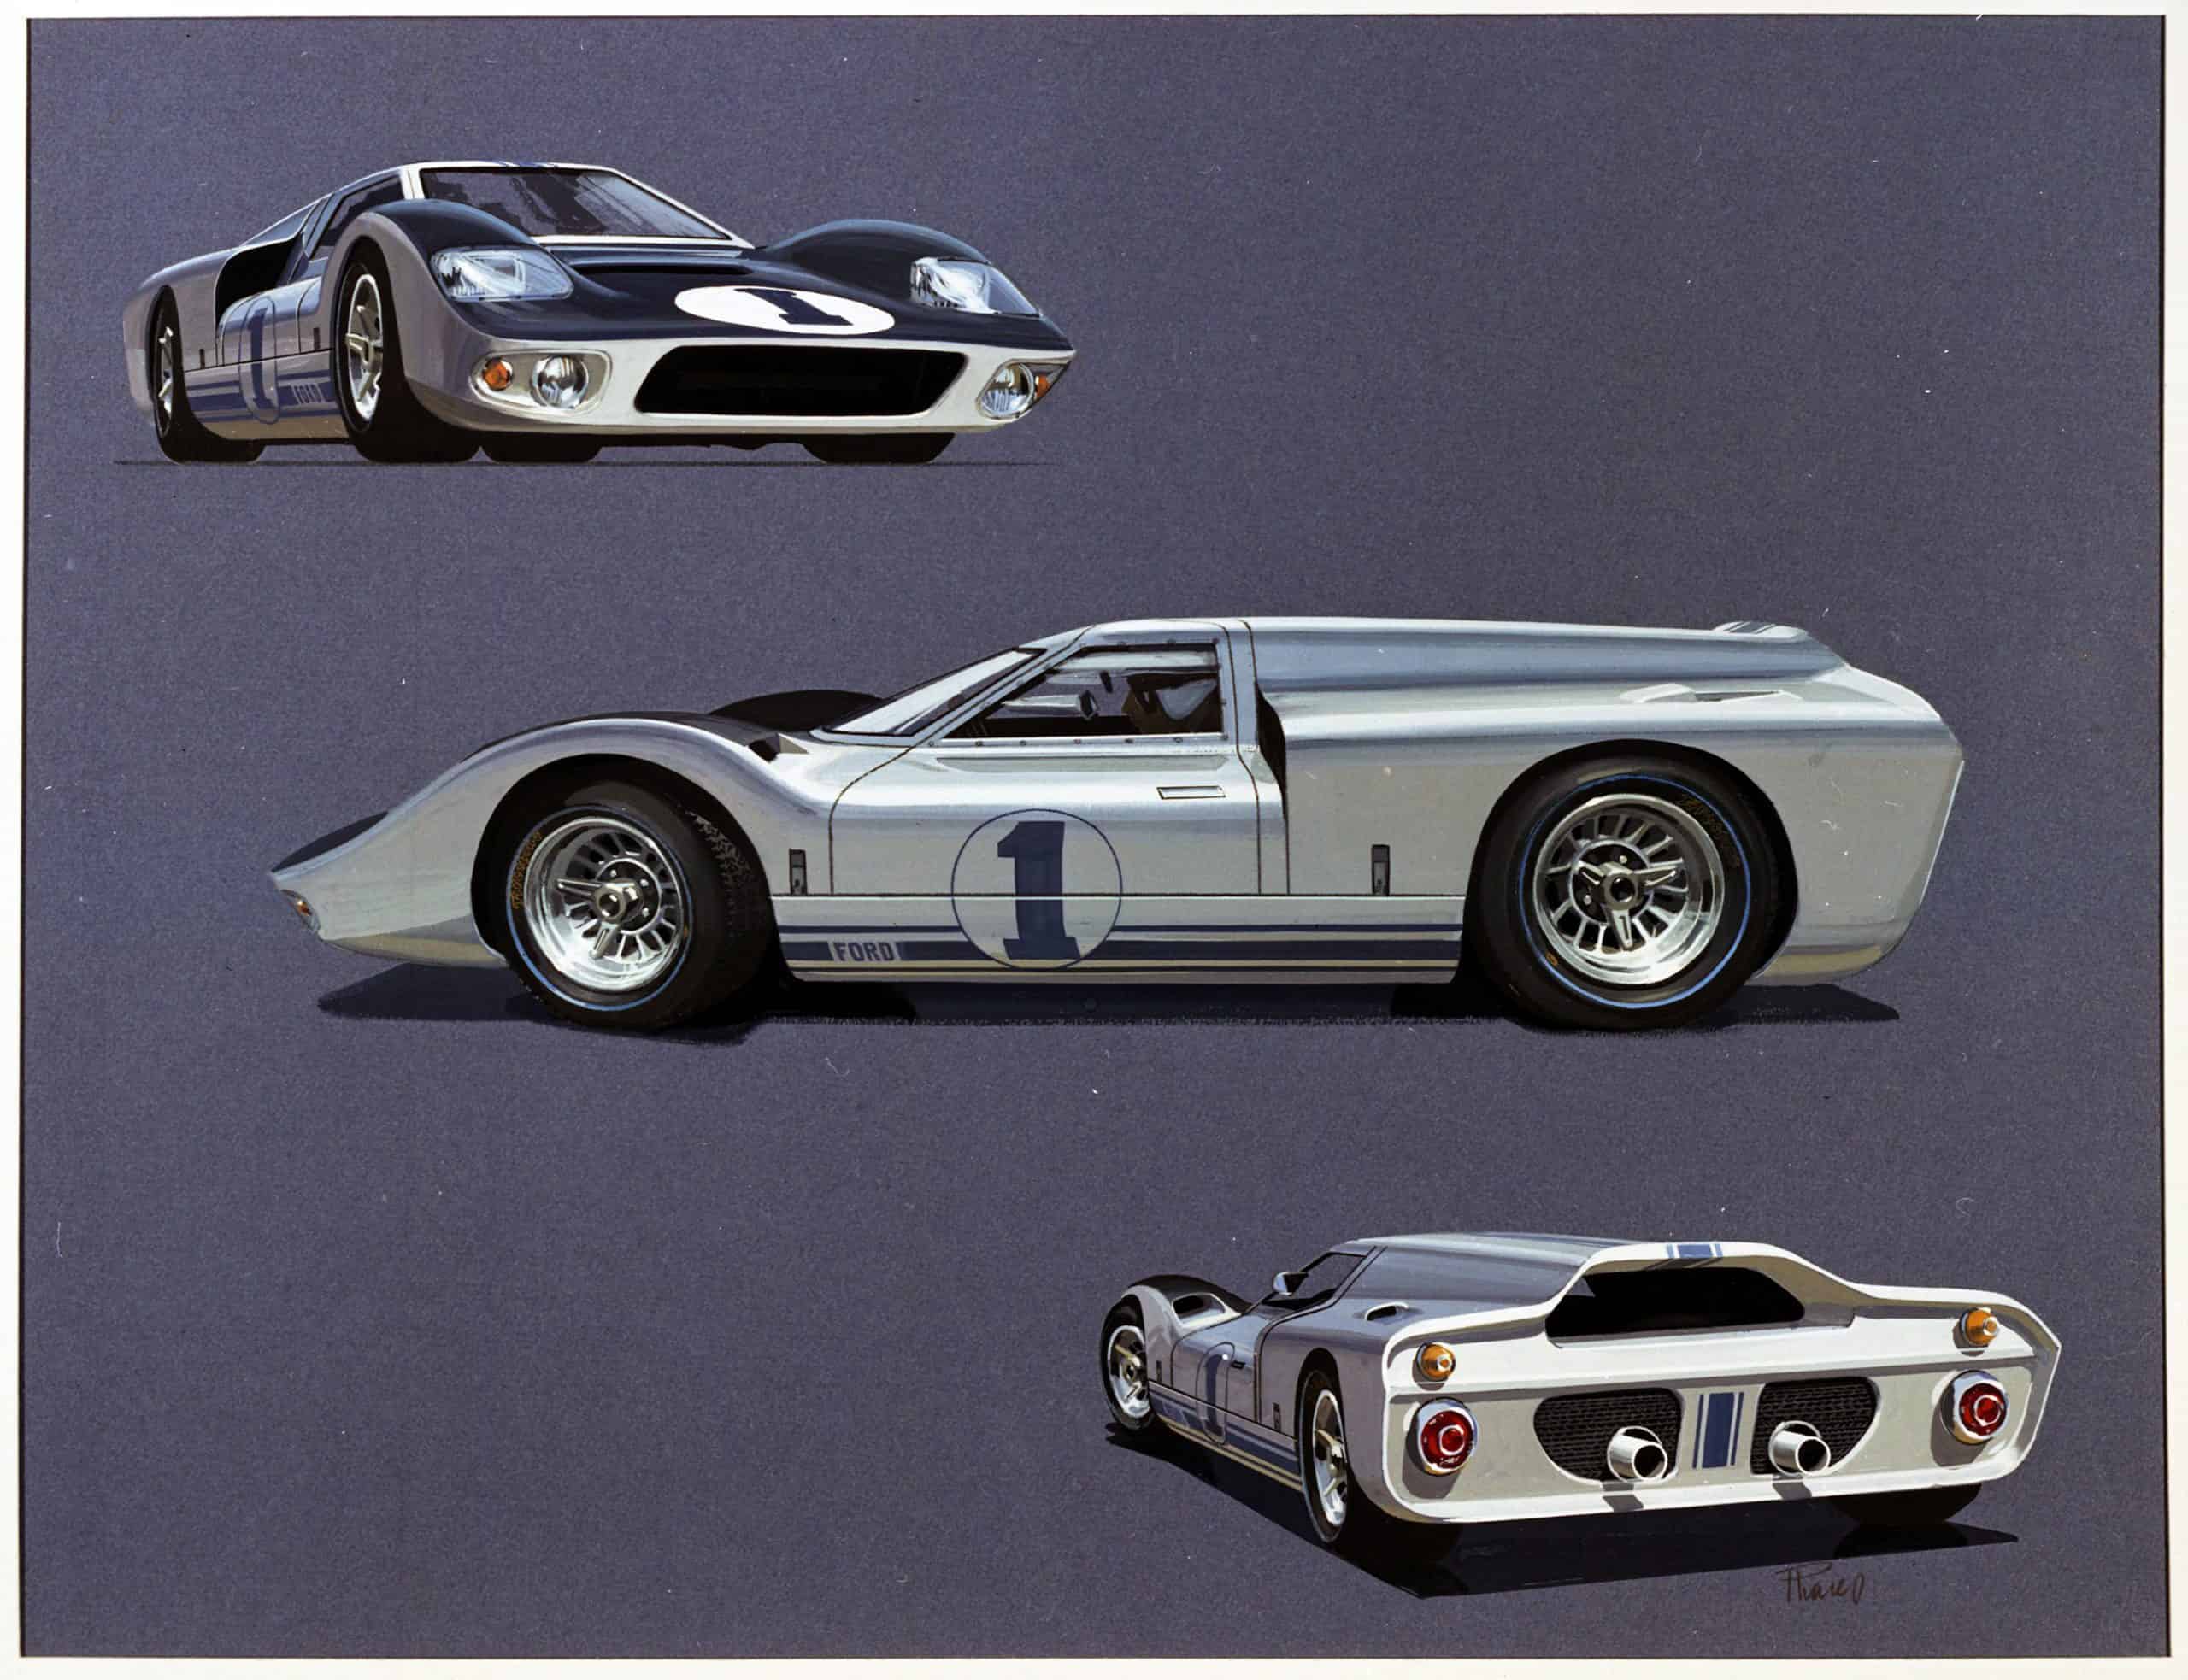 Miles форд. Ford gt40 Prototype. Ford gt40 j car. Форд ГТ 40 1966 Кен Майлз. Ford gt40 1966.